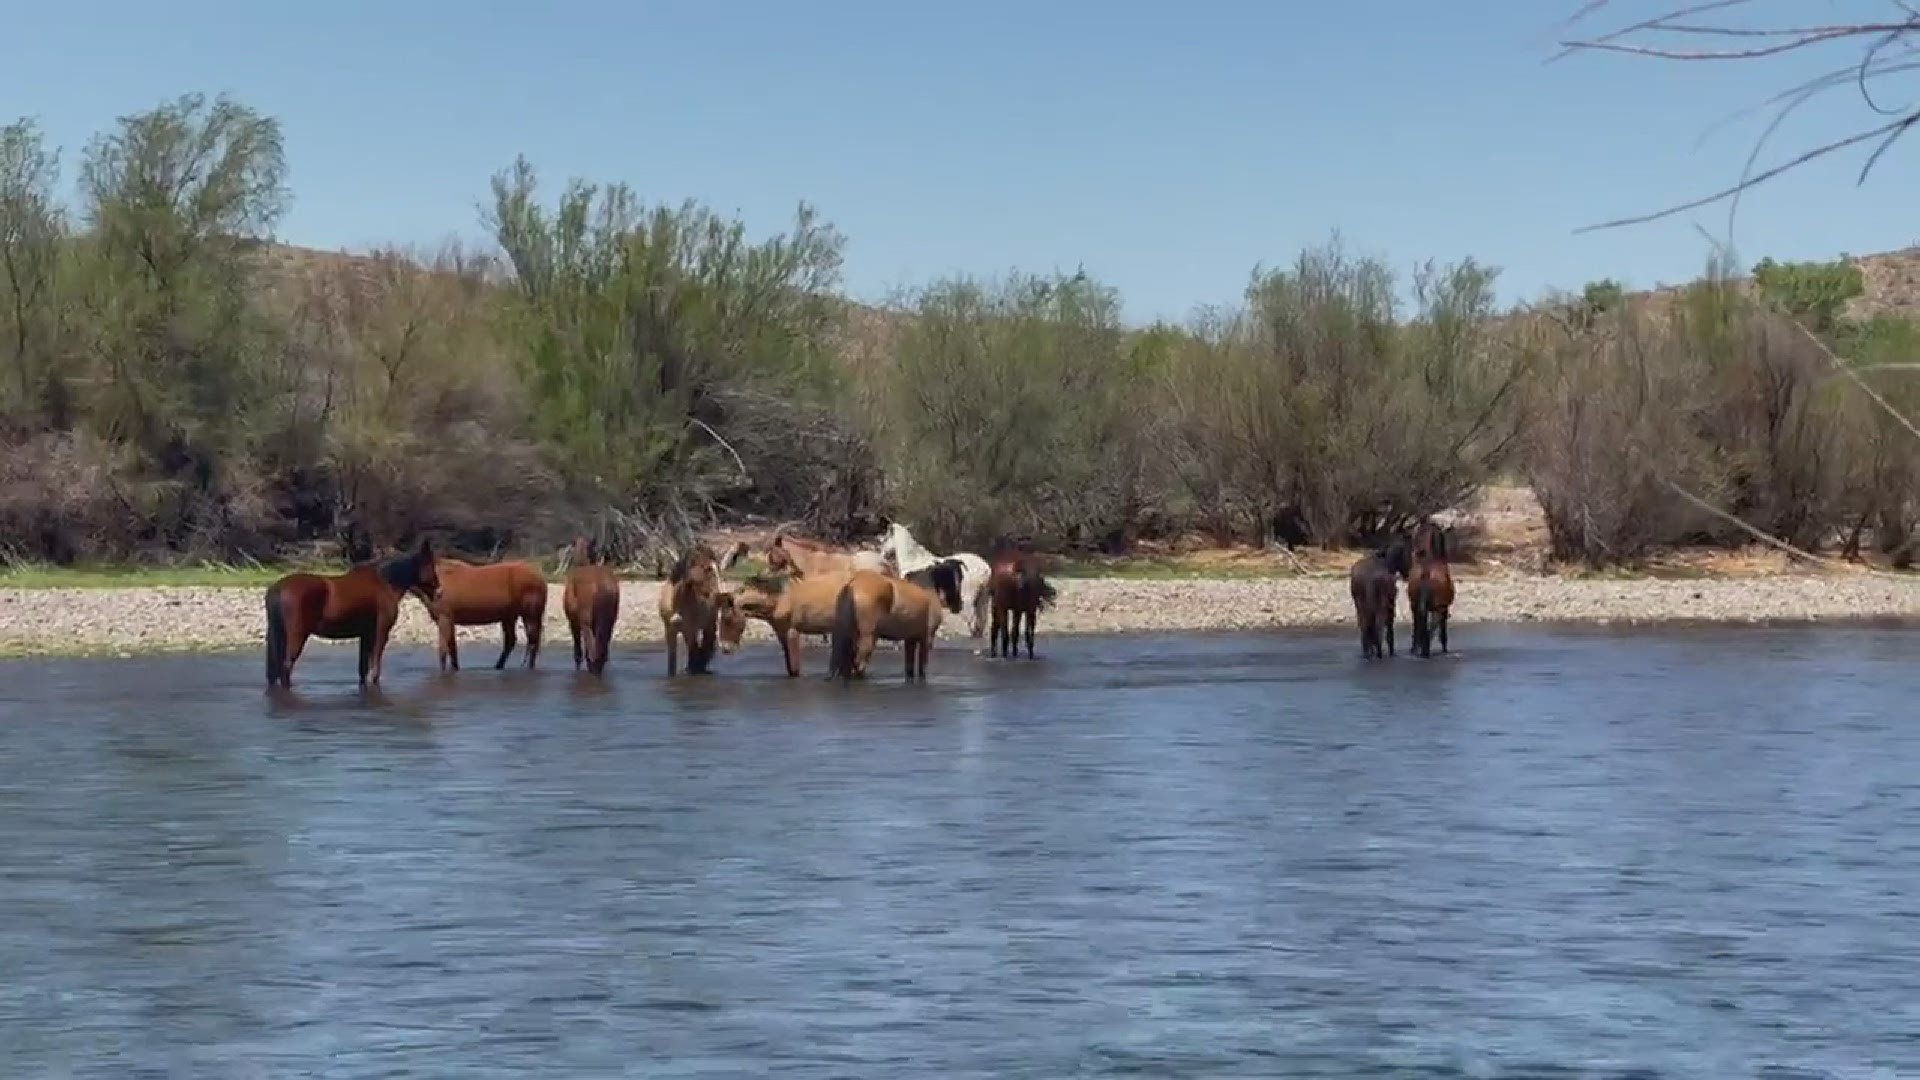 Horses playing in water at Tonto National Forest on March 30
Credit: Chuck Donald